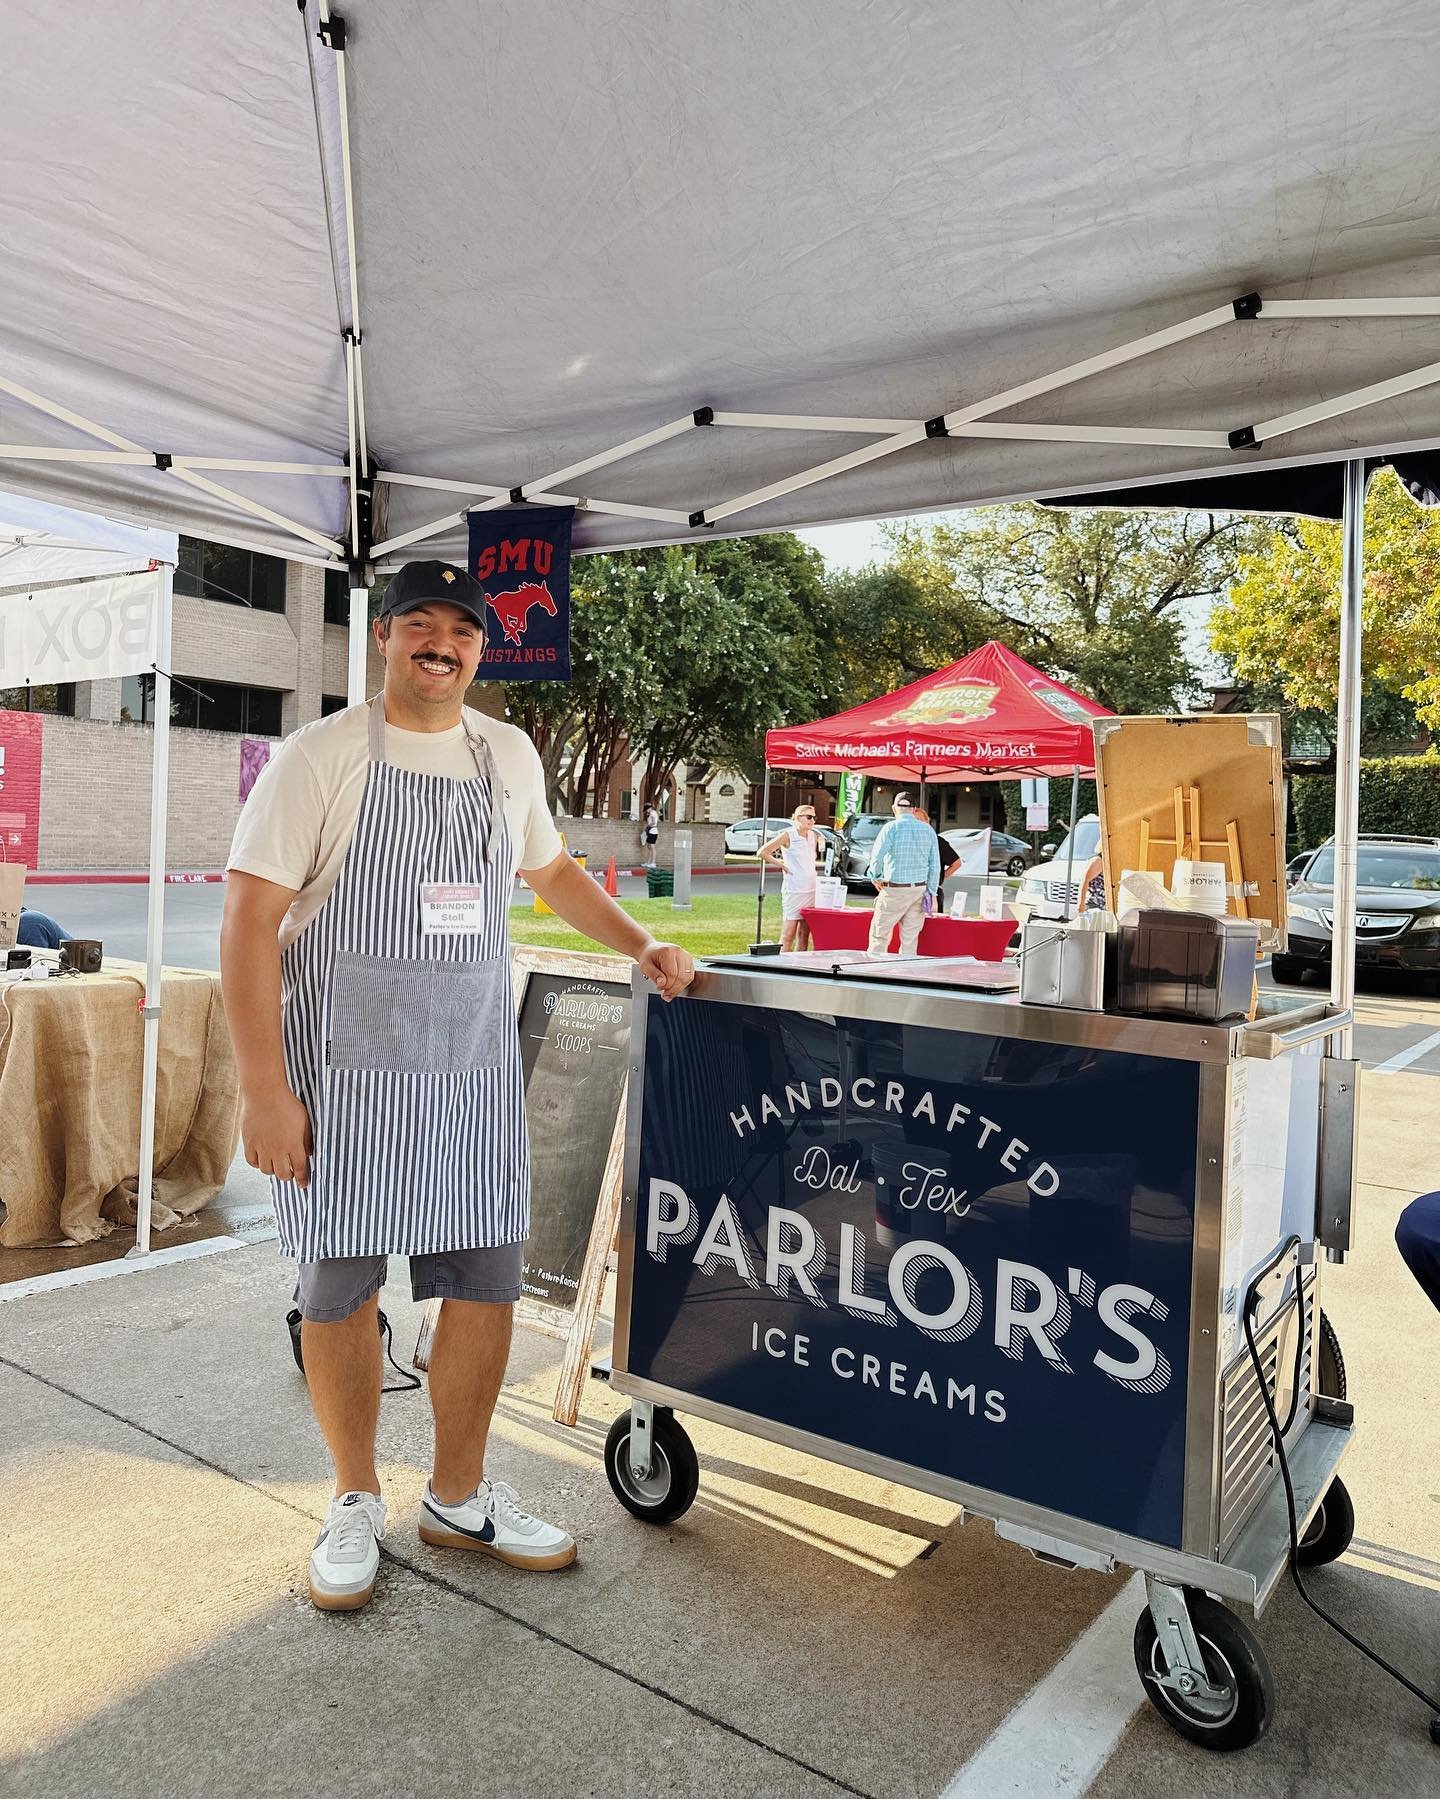 TOMORROW (Saturday) we&rsquo;re back at the @saintmichaelsmarket for our fourth season as a vendor!!

This market is super special to us. Not only is it THE BEST edible-only market in Dallas, but it&rsquo;s really where we got our big start after the